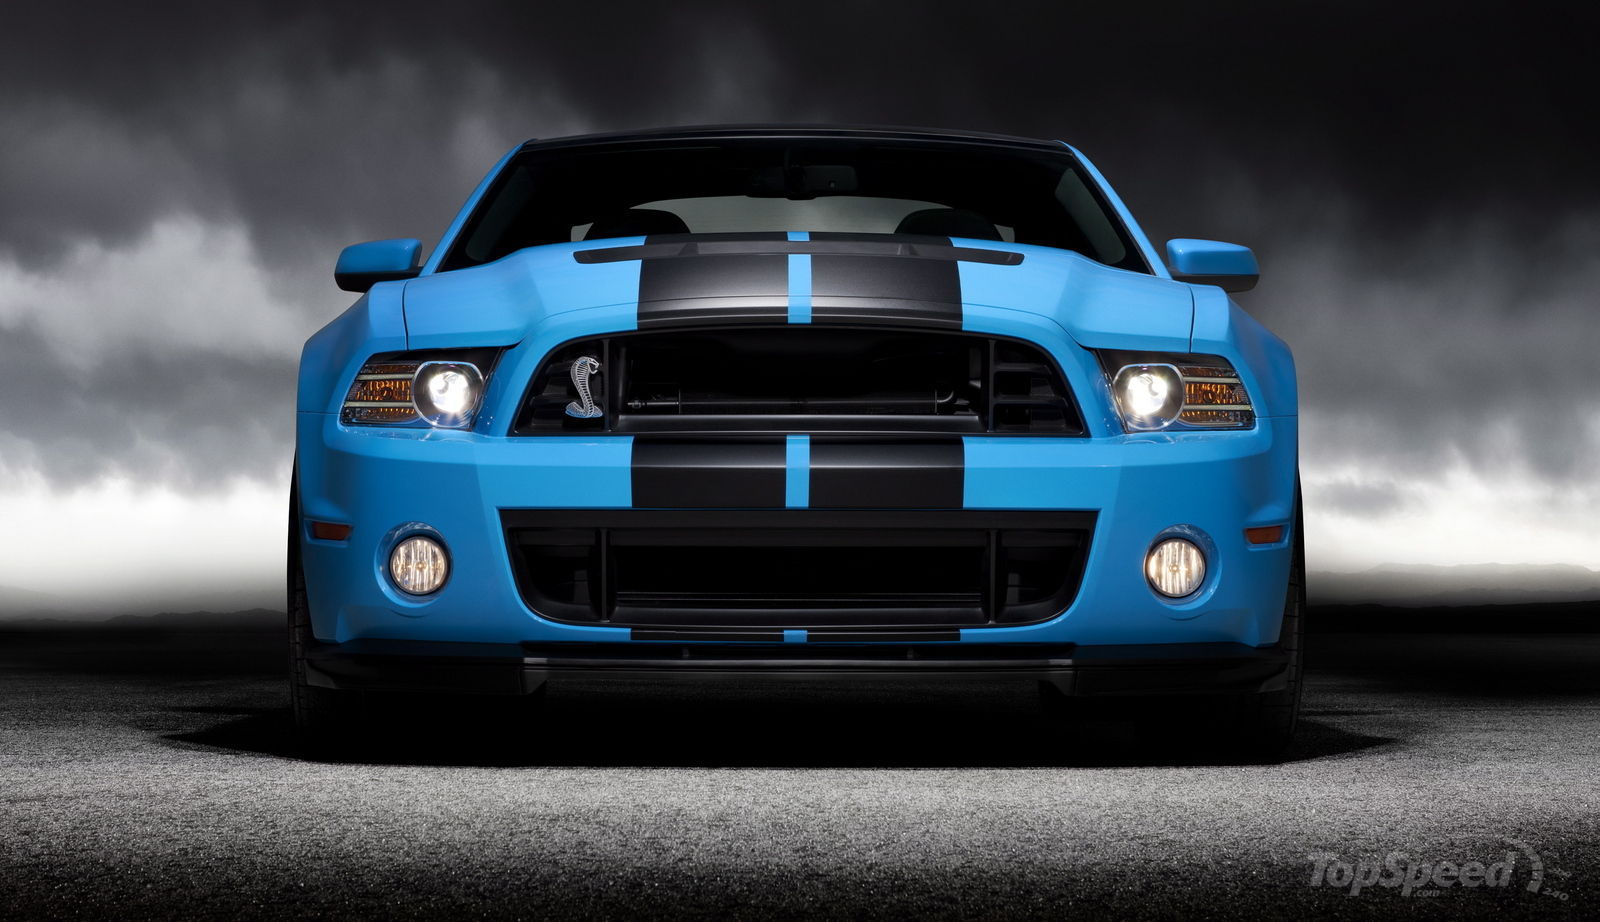 Ford Mustang Shelby Cobra GT 500 Backgrounds, Compatible - PC, Mobile, Gadgets| 1600x922 px